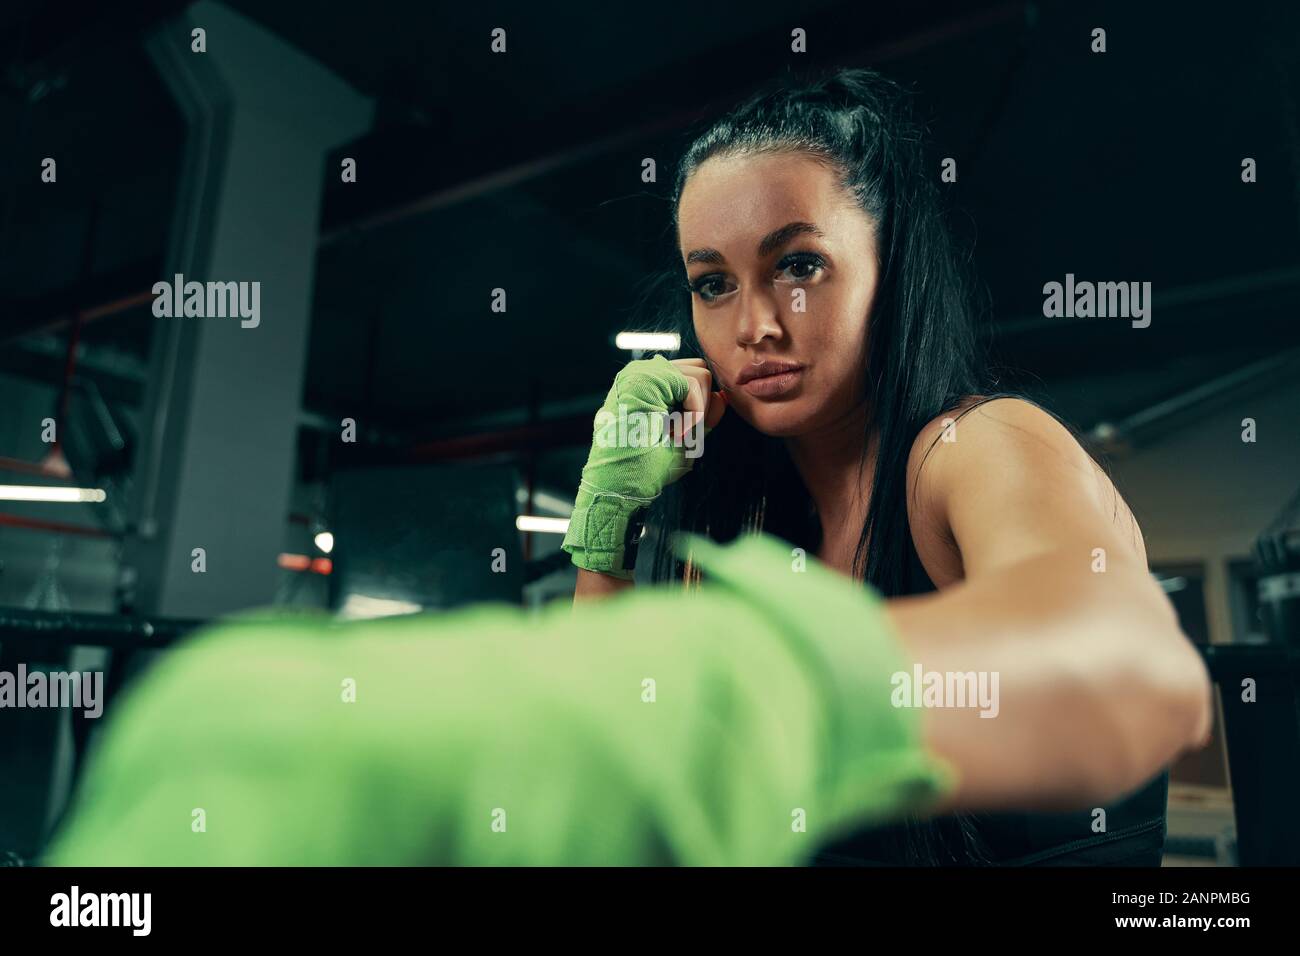 Athletic woman standing prepared for fight with boxing bandages on hands during box training Stock Photo